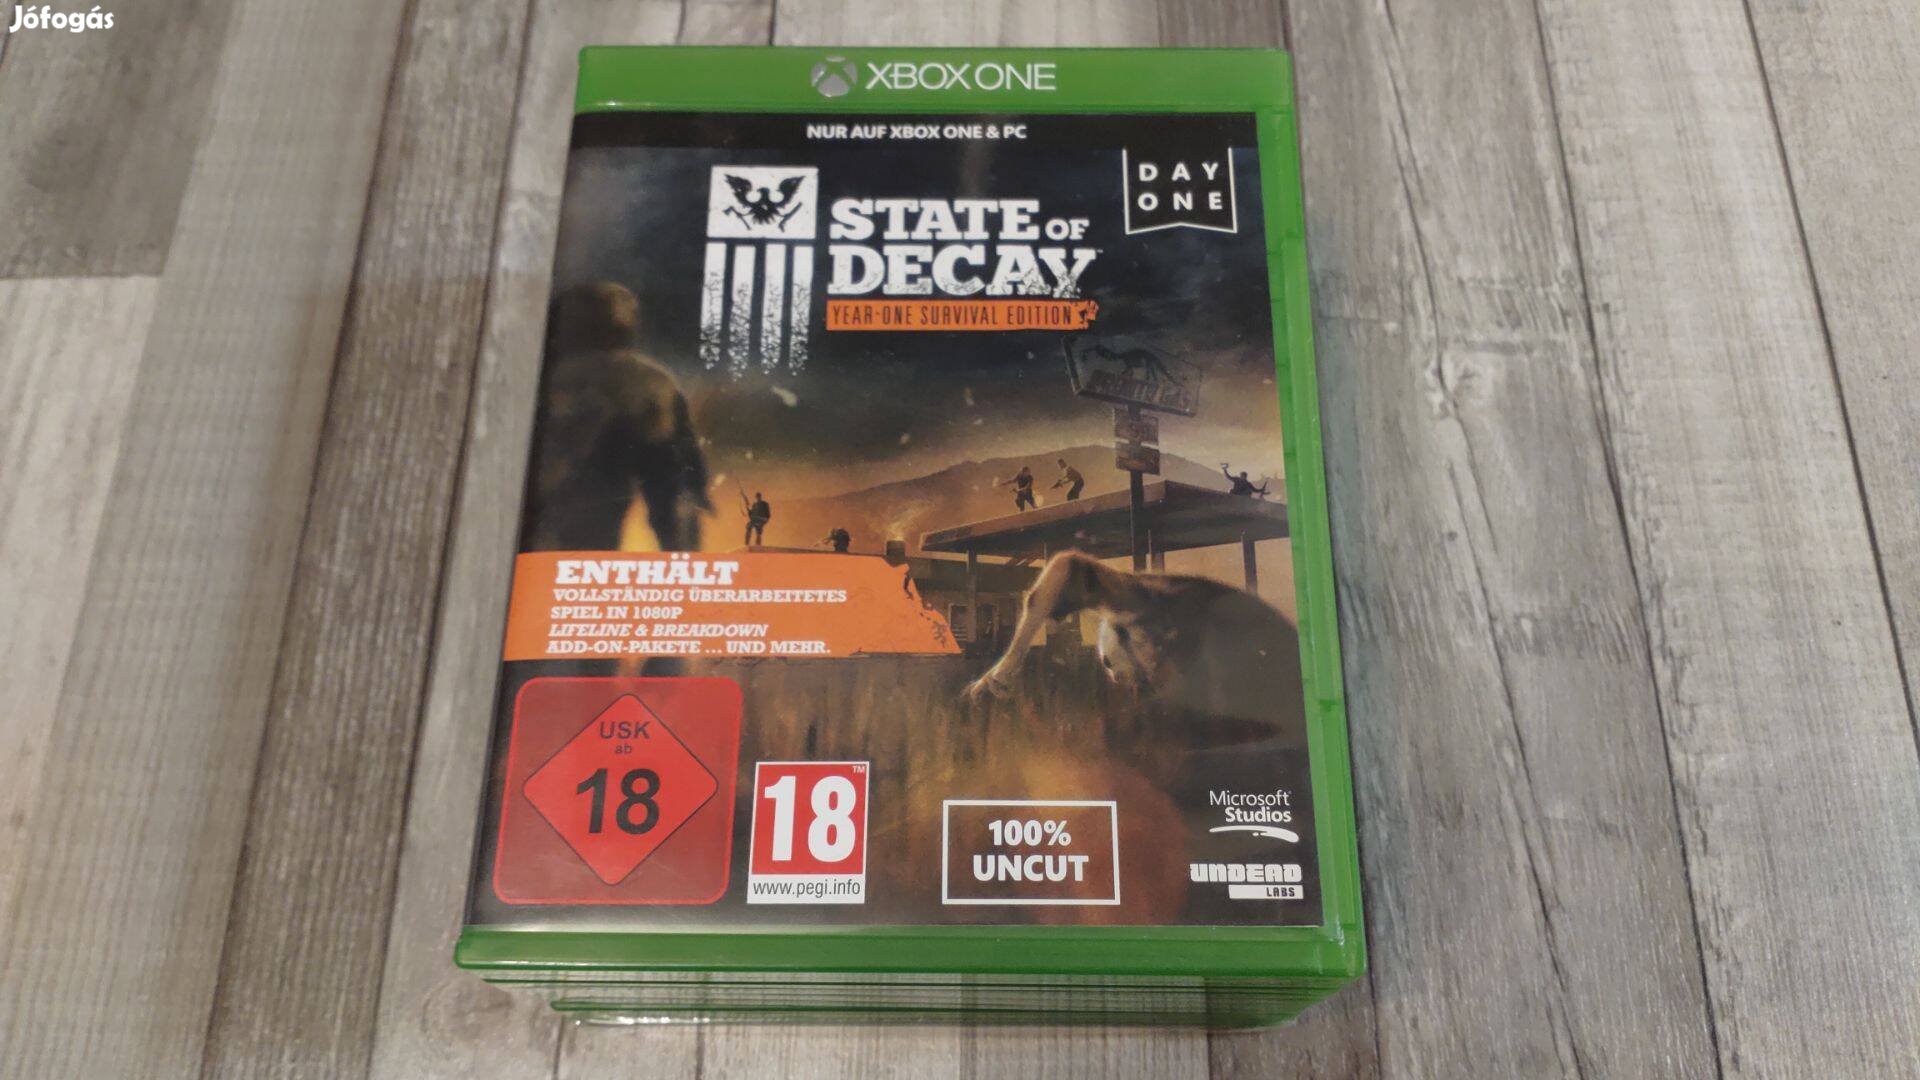 Top Xbox One(S/X)-Series X : State Of Decay Year-One Survival Day One